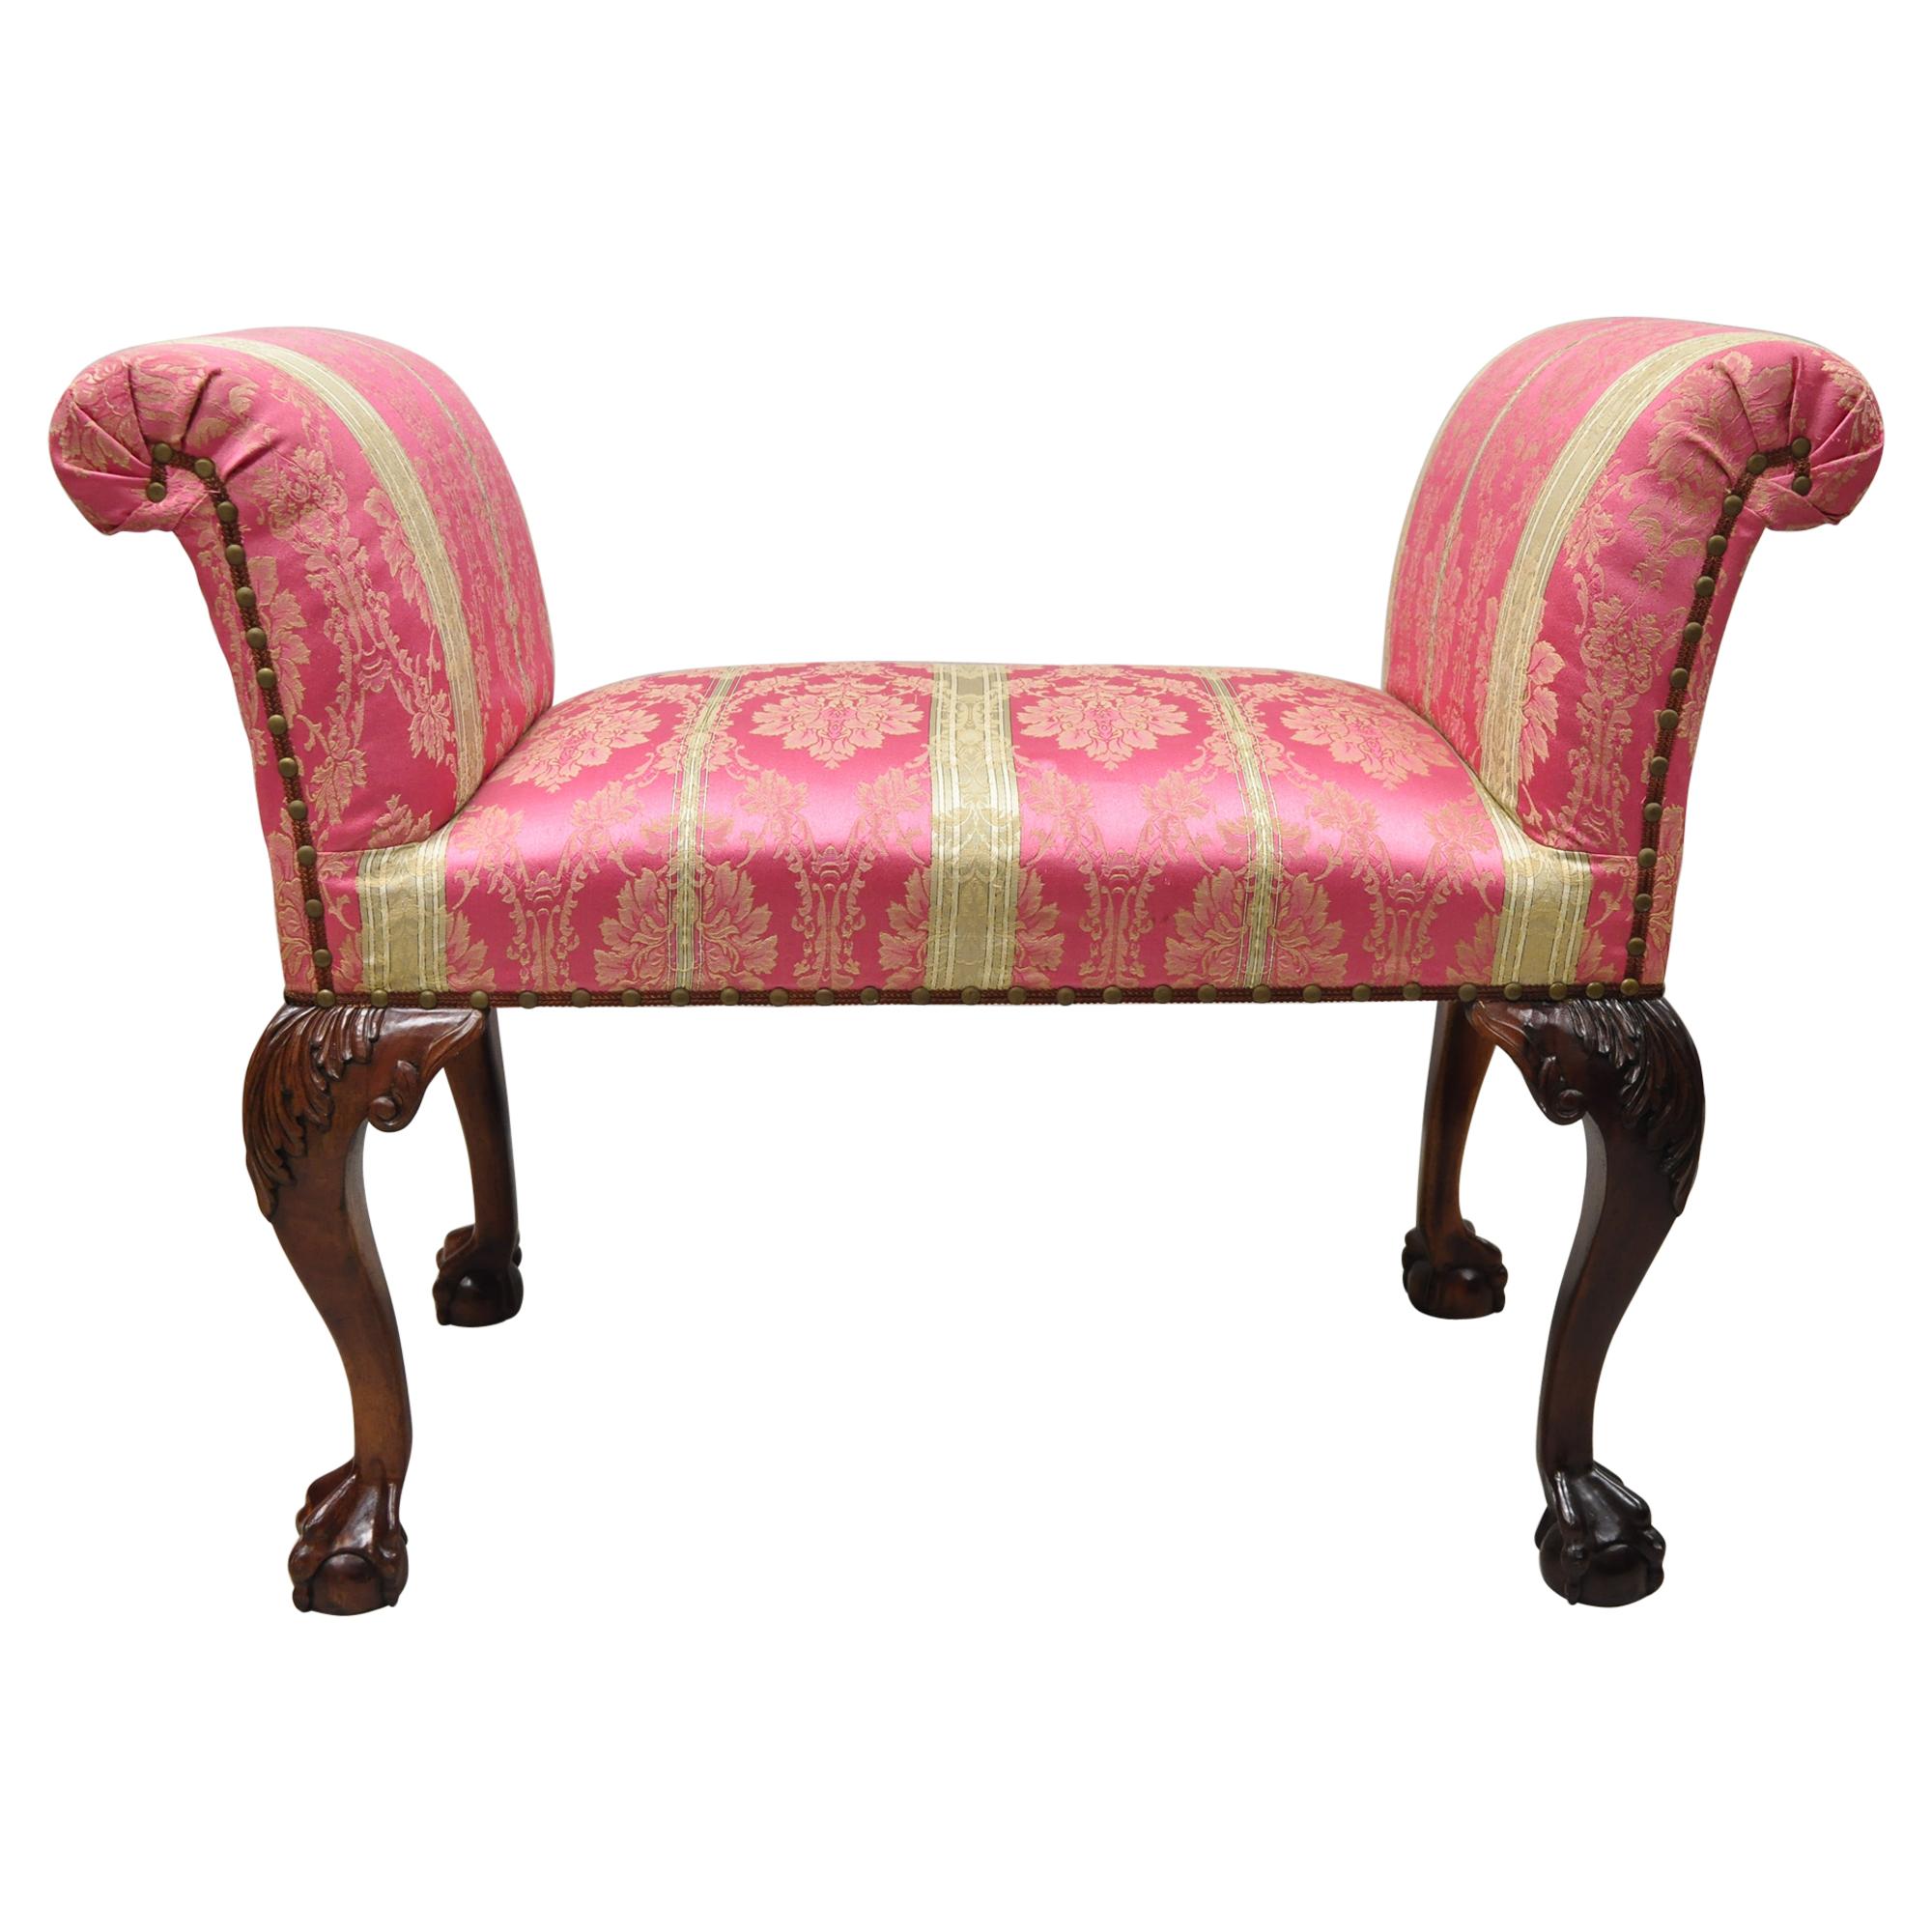 Paramount Antiques Inc Chippendale Mahogany Ball and Claw Pink Upholstered Bench